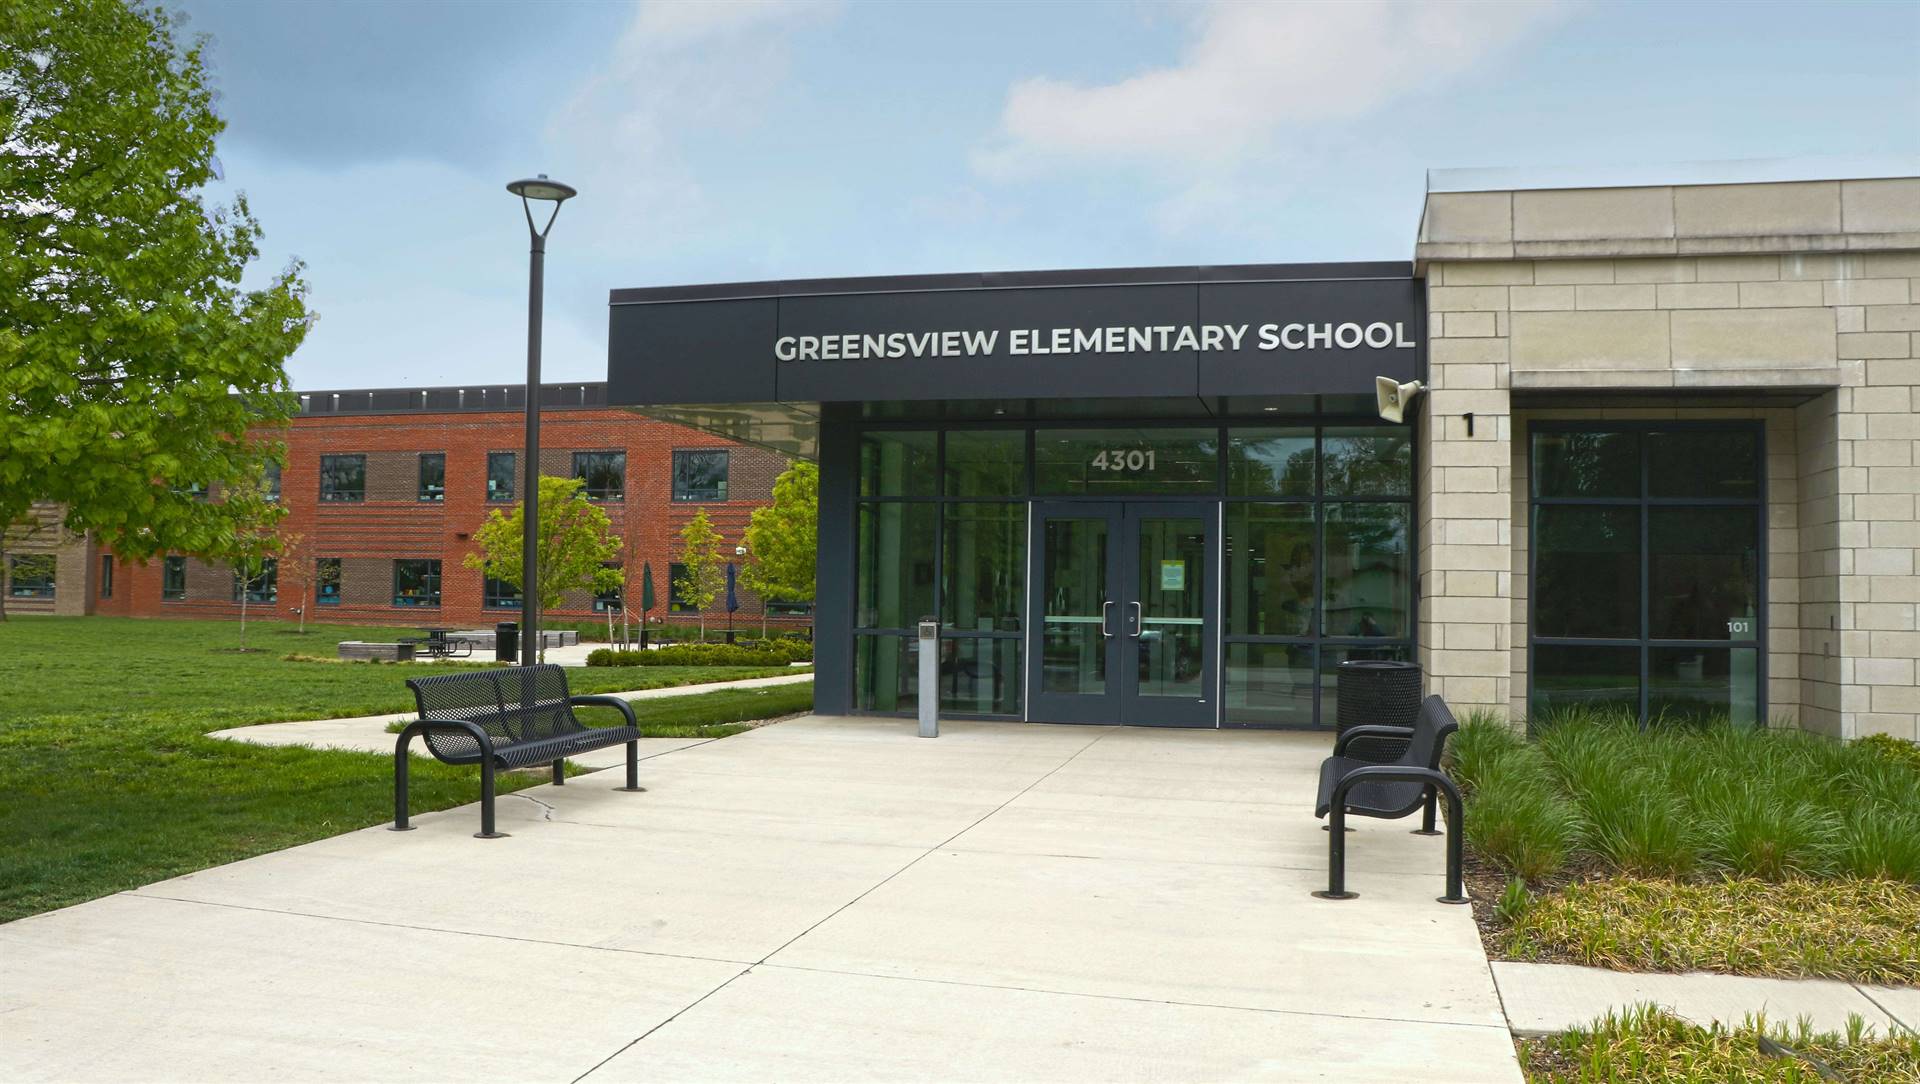 The new Greensview Elementary School